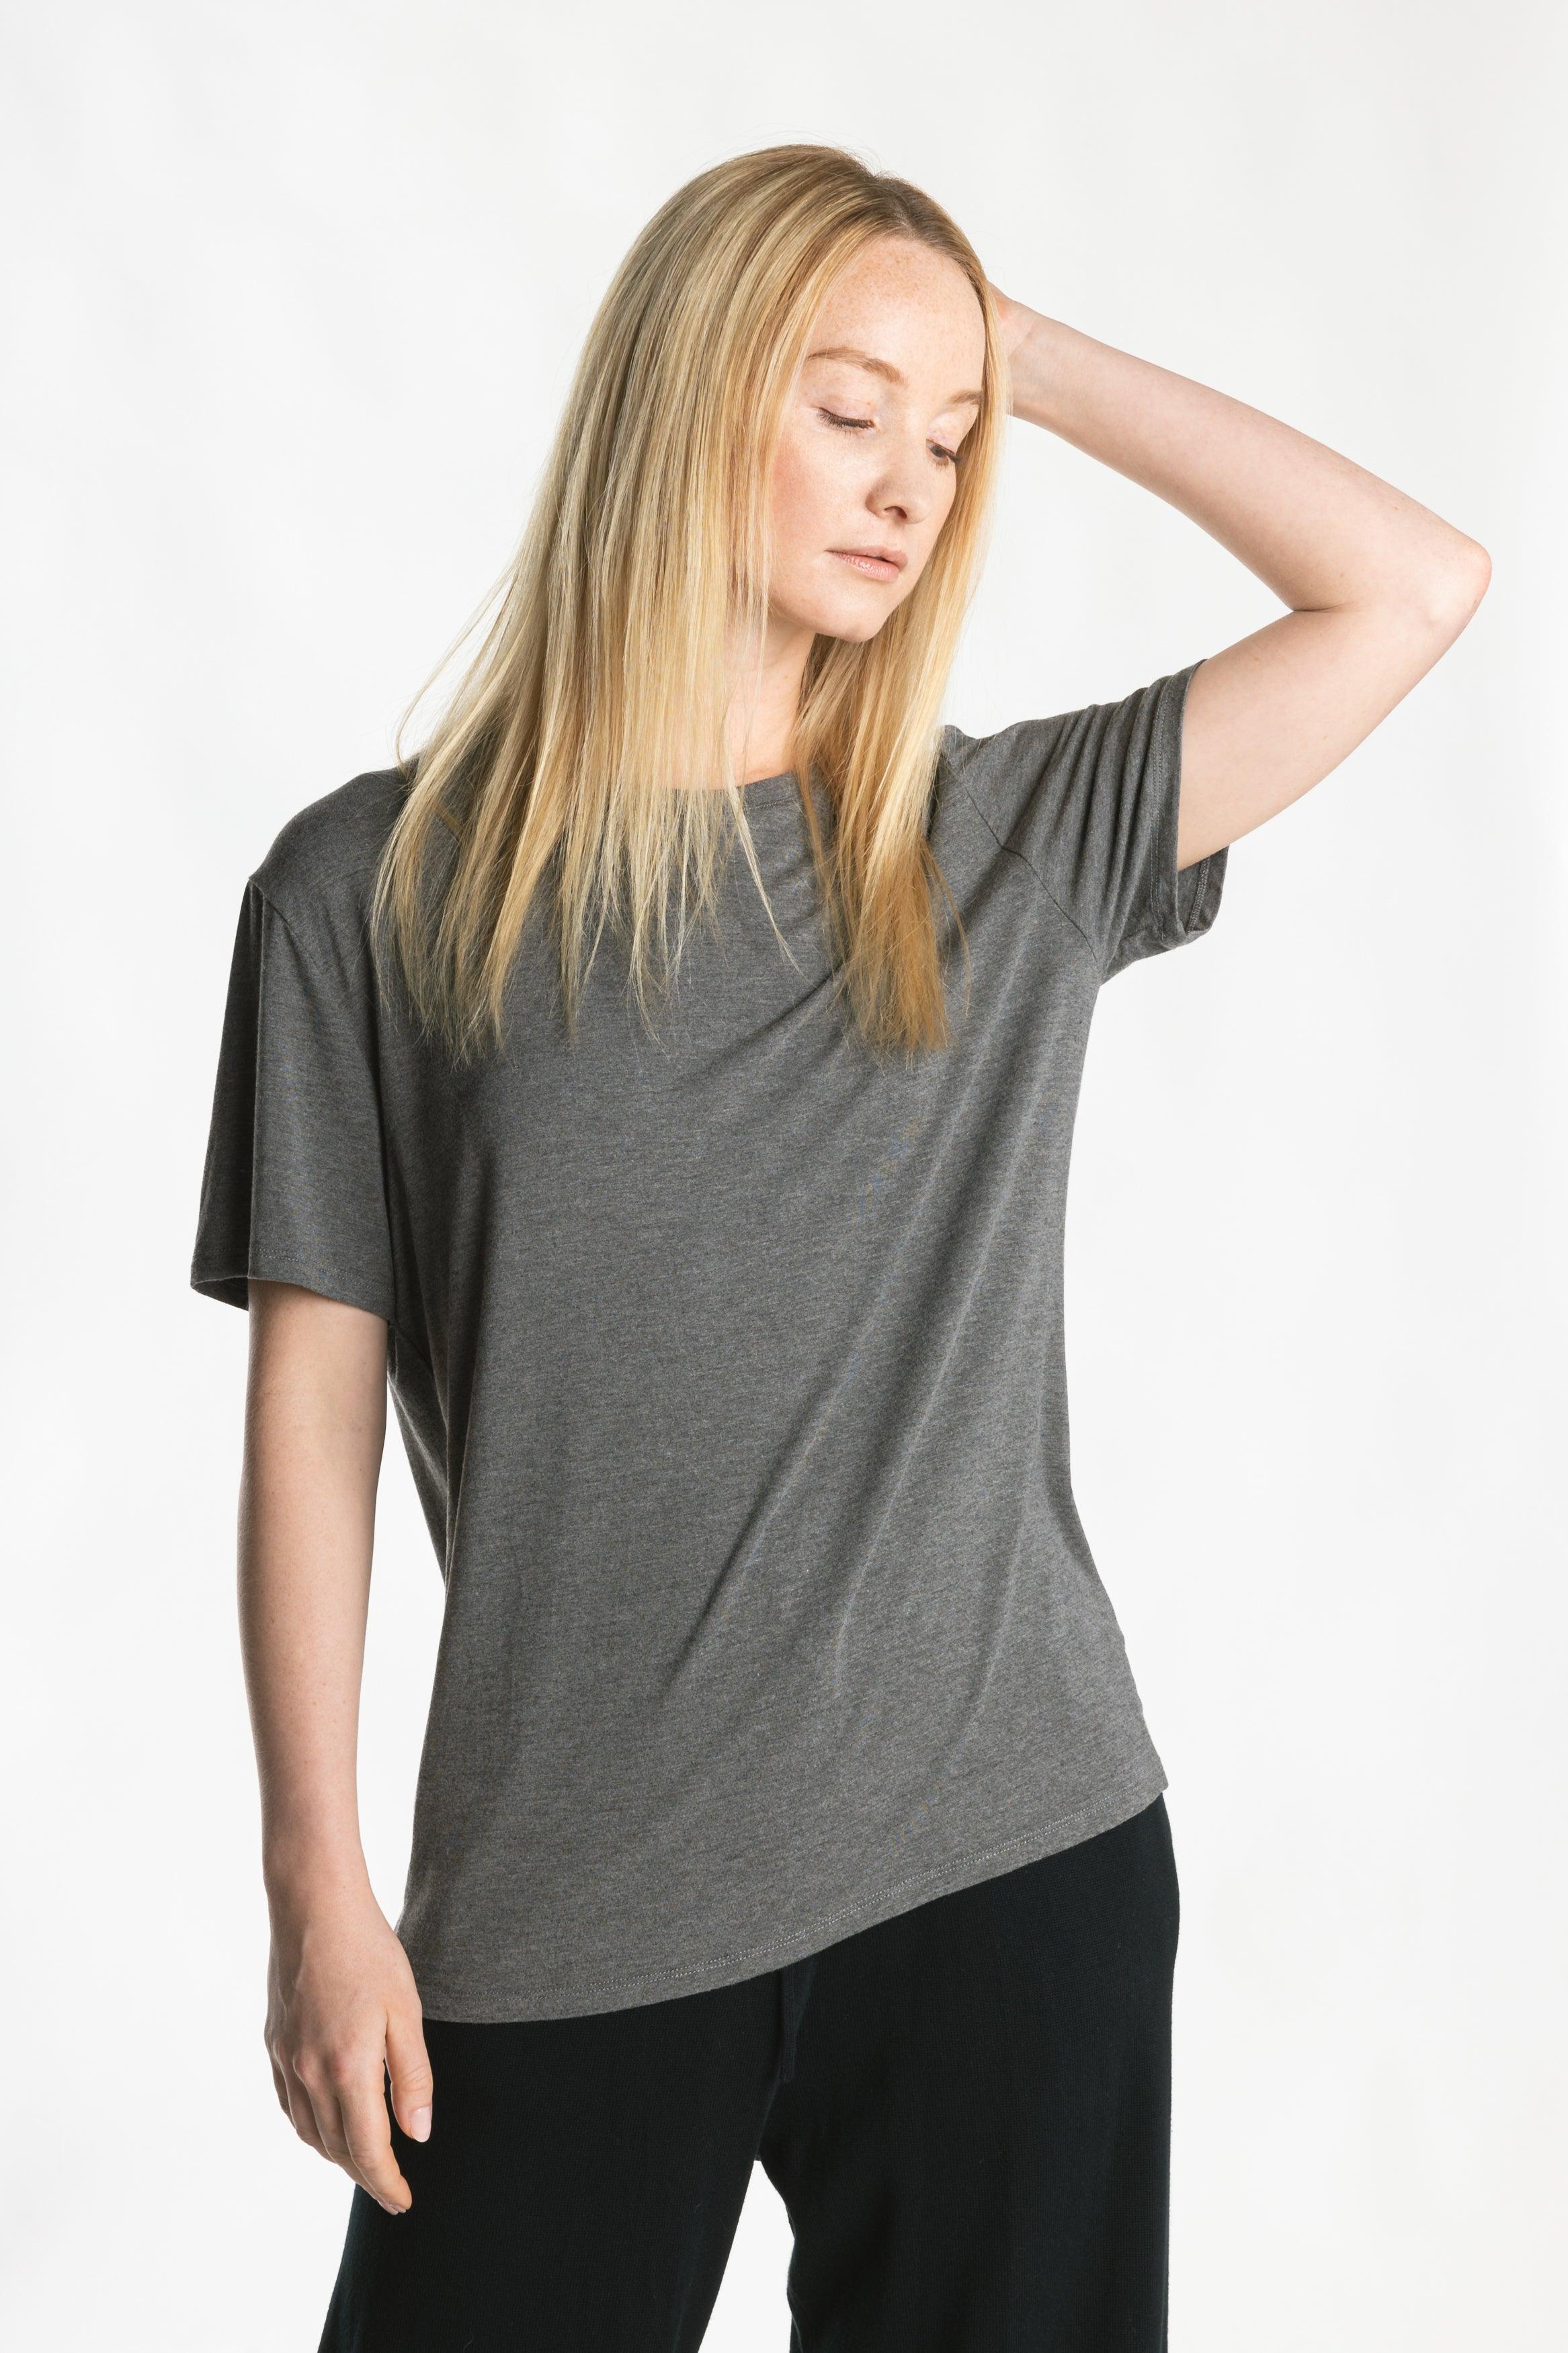 Women's Oversized Bamboo Tee - NOT LABELED